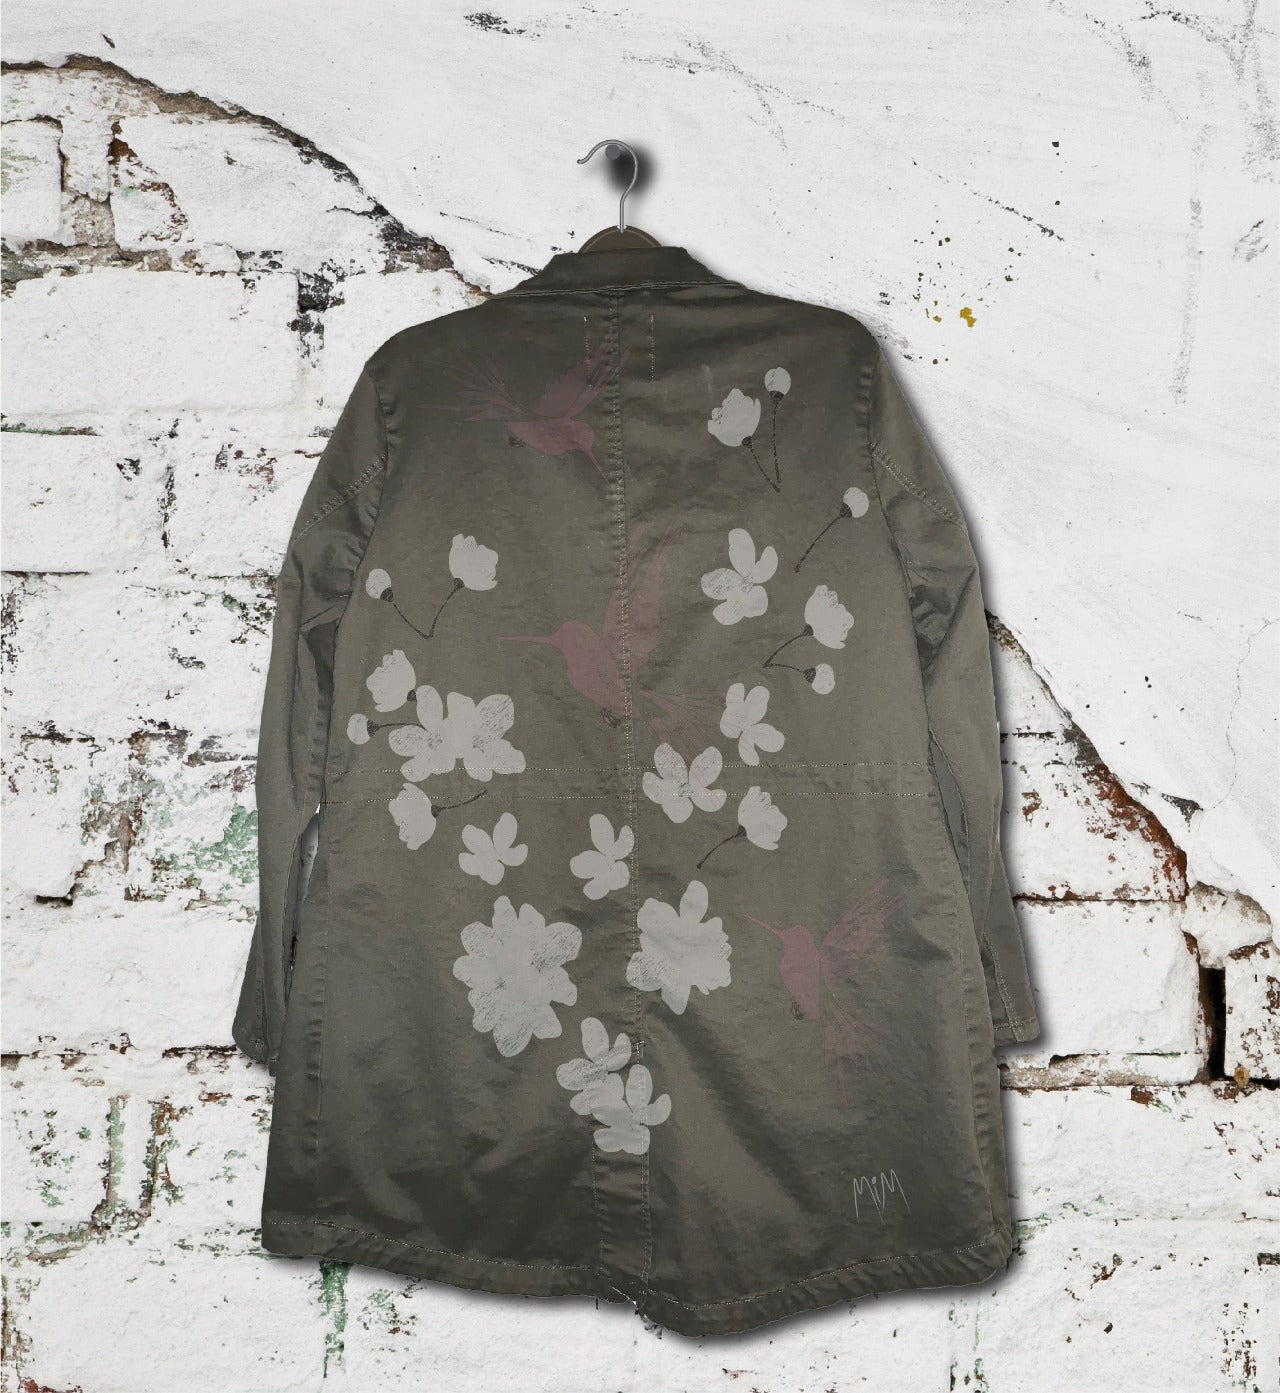 Soft Cherry Blossoms and Hummingbirds - Hand-Painted Bush Jacket